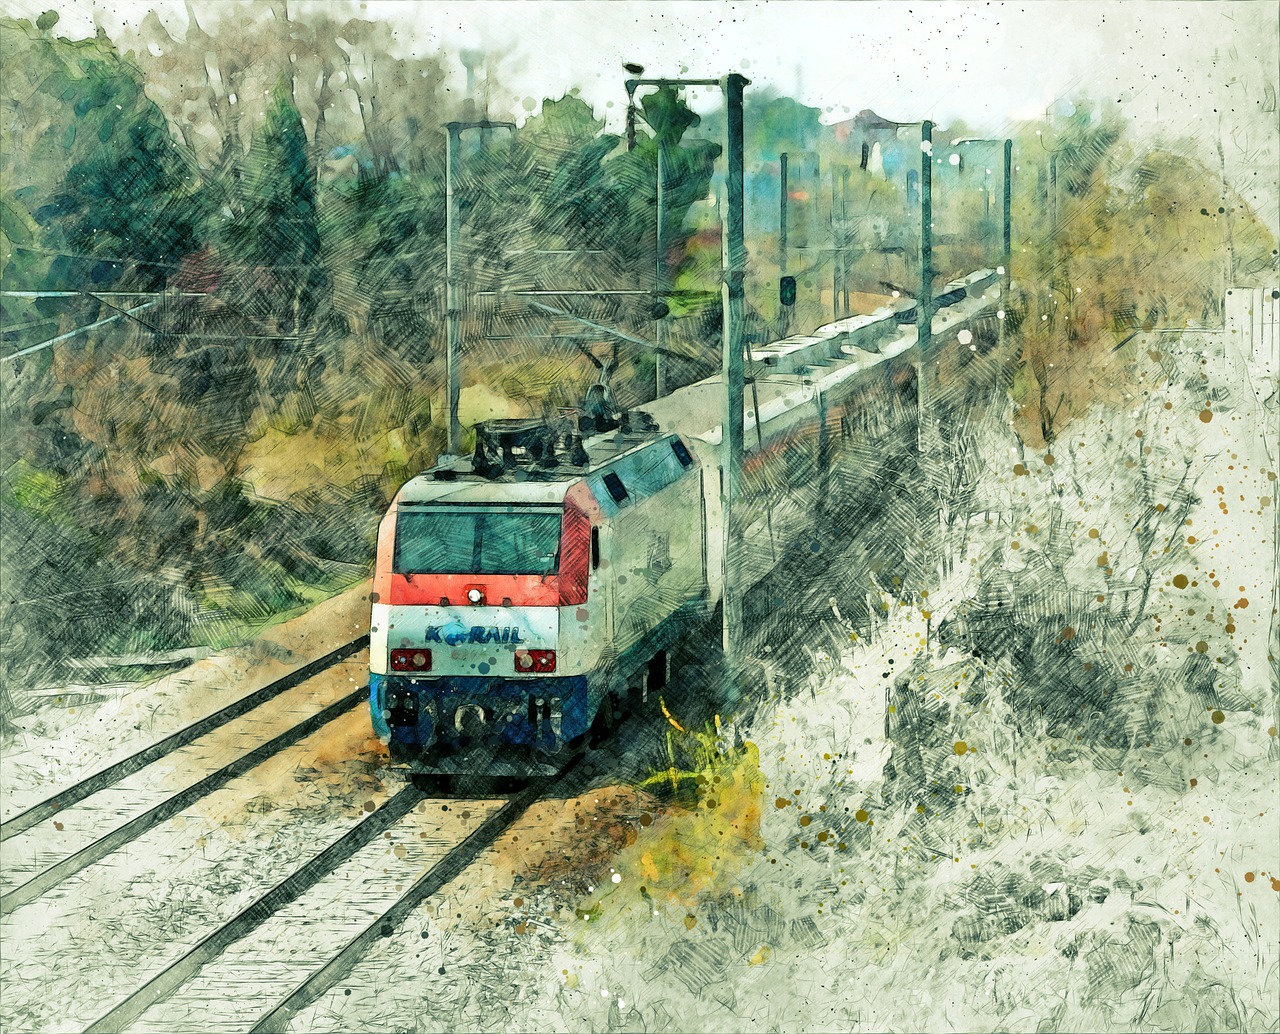 a watercolor painting of a train coming down the tracks, a digital painting, by Relja Penezic, shutterstock, grainy photograph, mixed media style illustration, scratches on photo, suburban